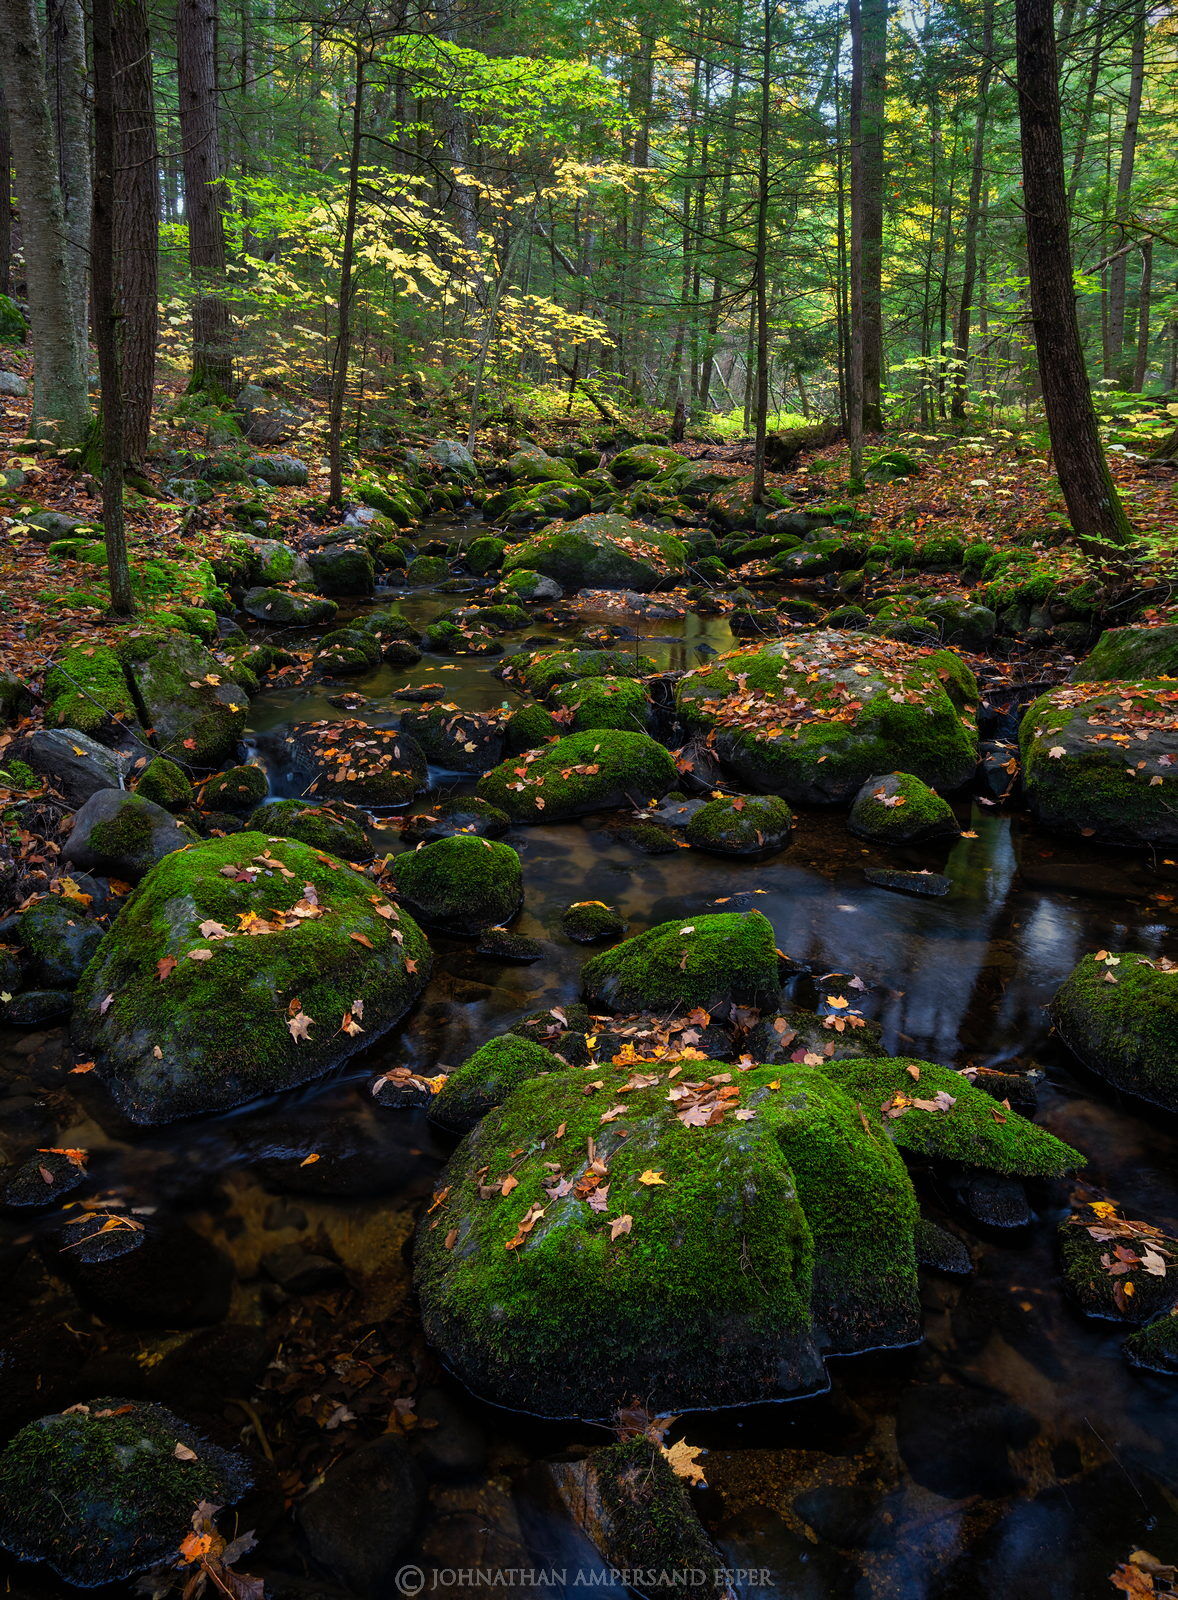 Spectacle Pond Outlet,stream,Shanty Bottom Brook,fall,2020,Spectacle Pond trail,mossy,mossy boulders,green boulders,moss